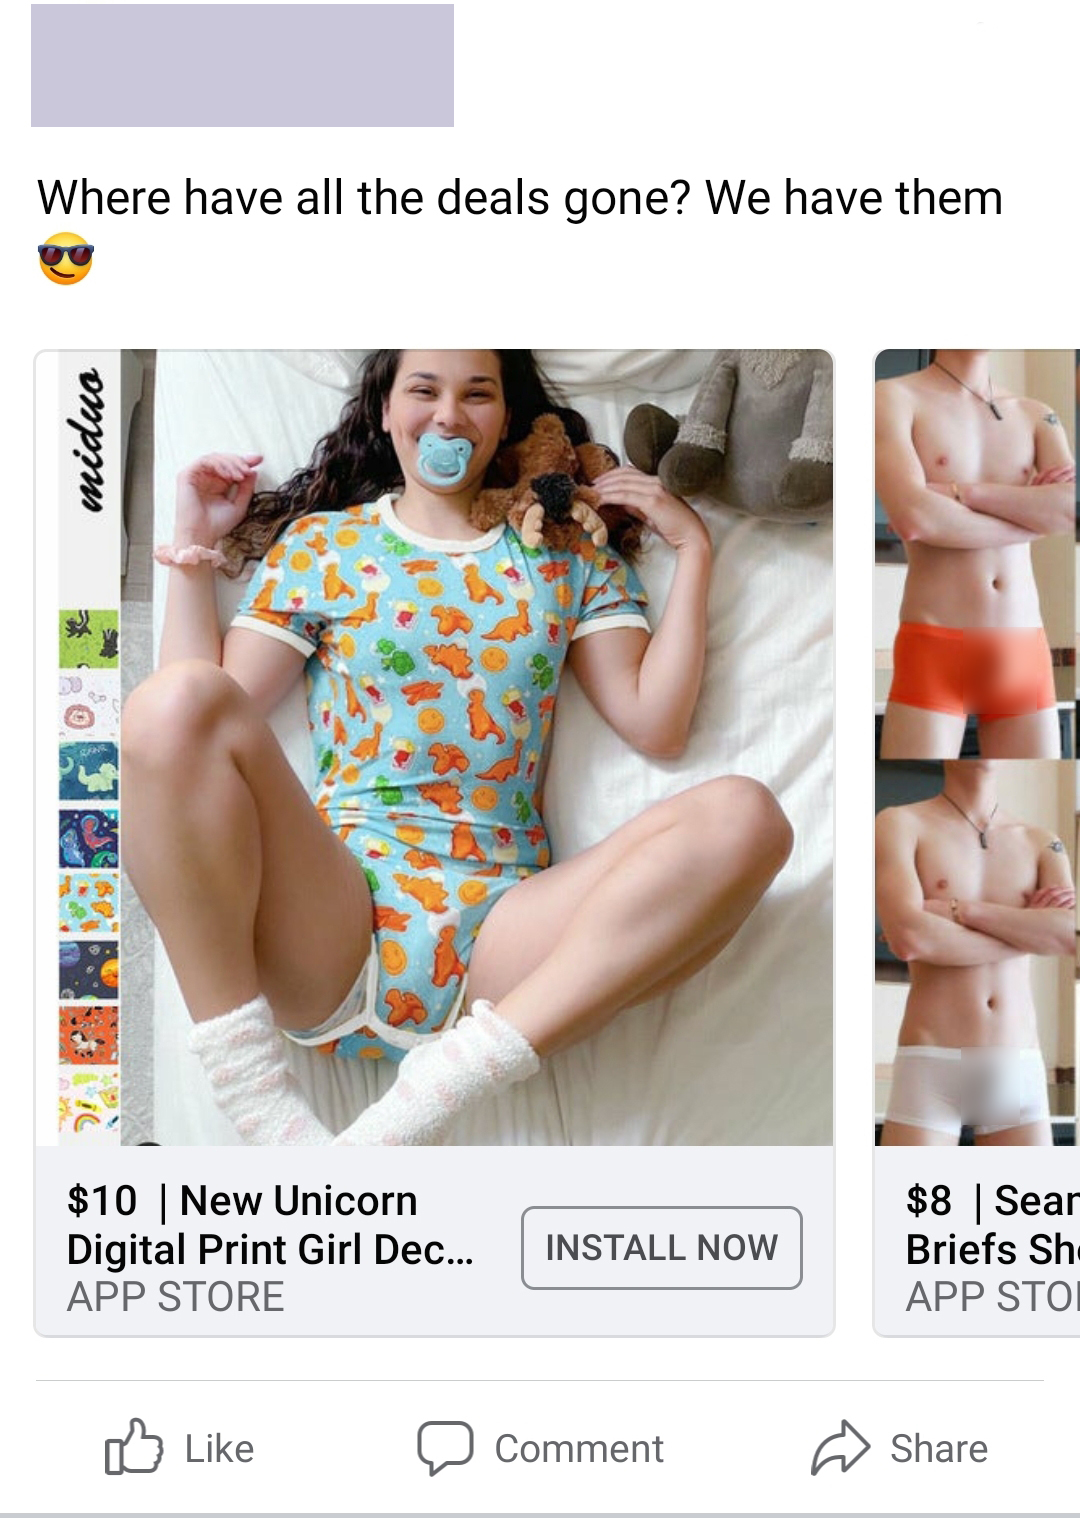 cringeworthy pics - shoulder - Where have all the deals gone? We have them midus $10 New Unicorn Digital Print Girl Dec... App Store Install Now $8 | Sear Briefs Sh App Sto Comment